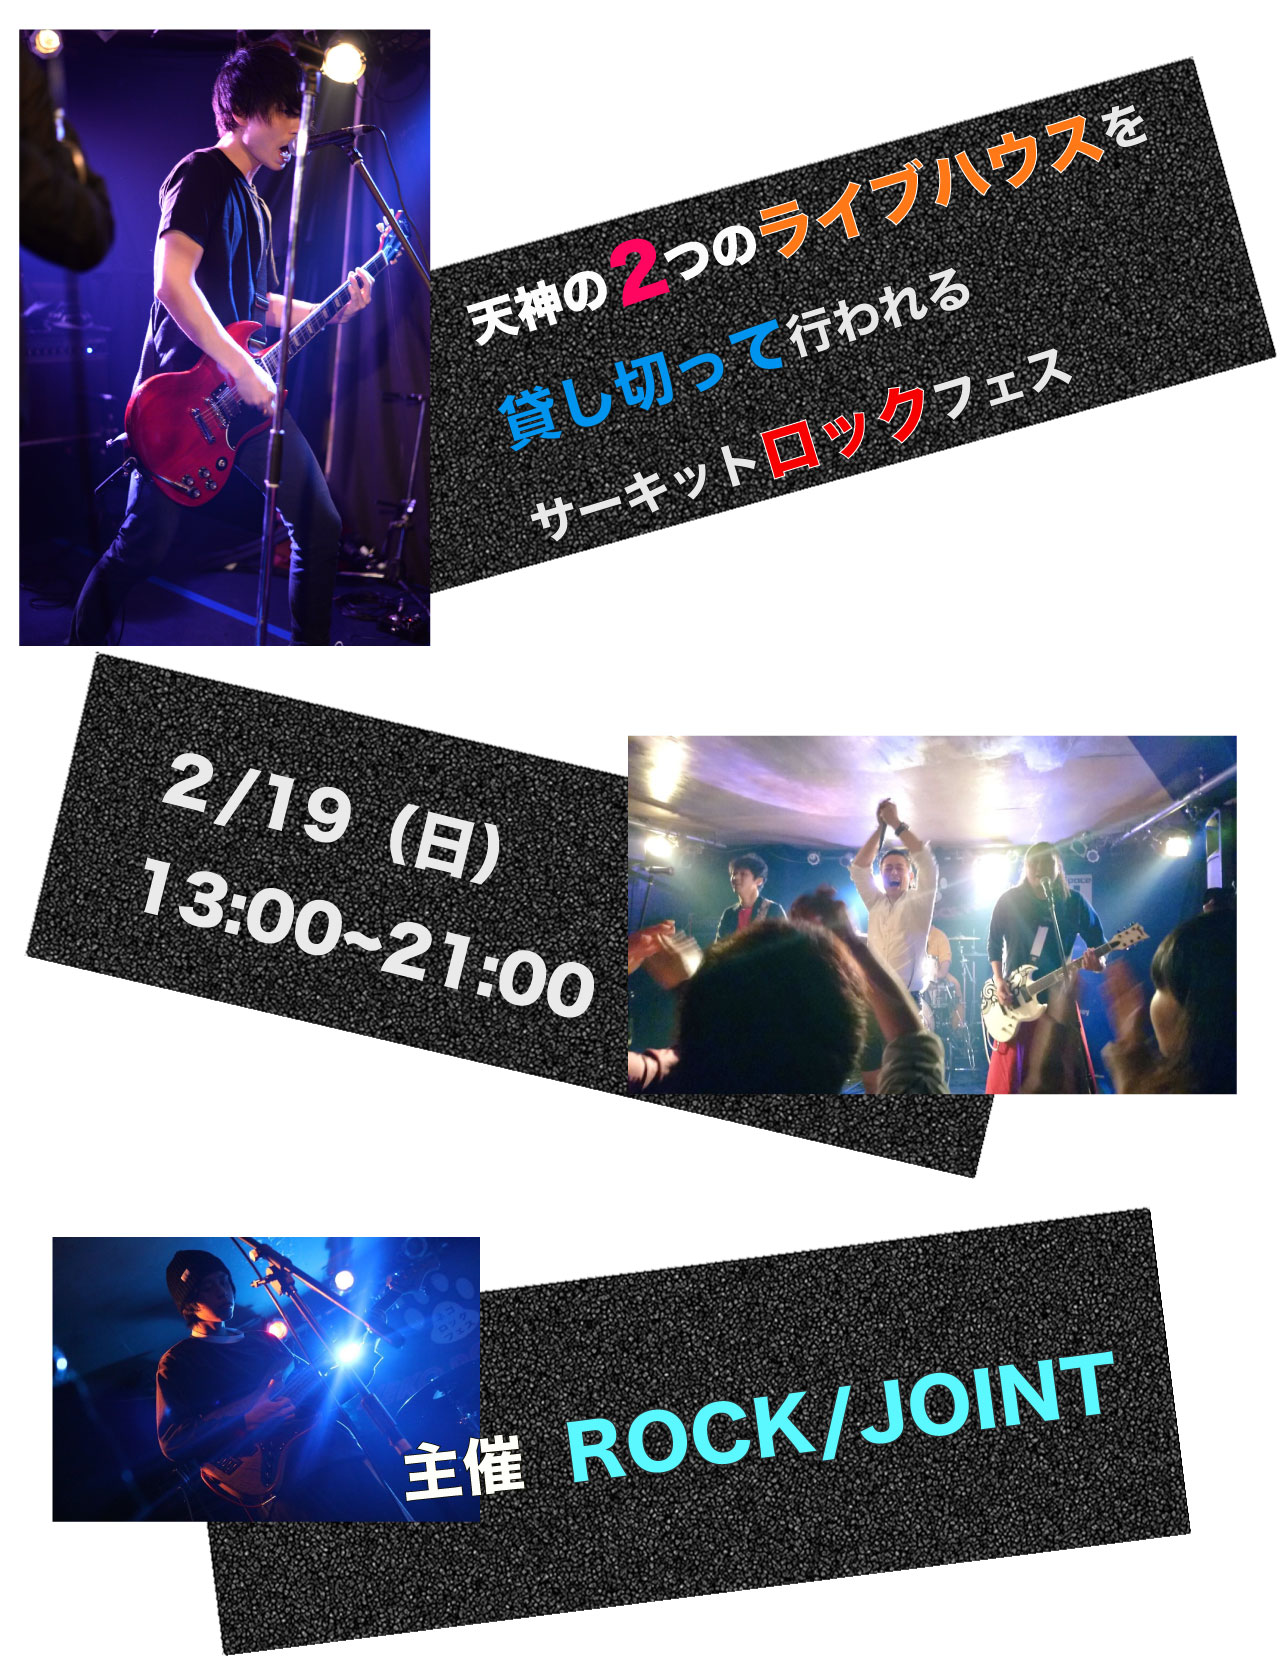 ROCK/JOINT主催ライブ